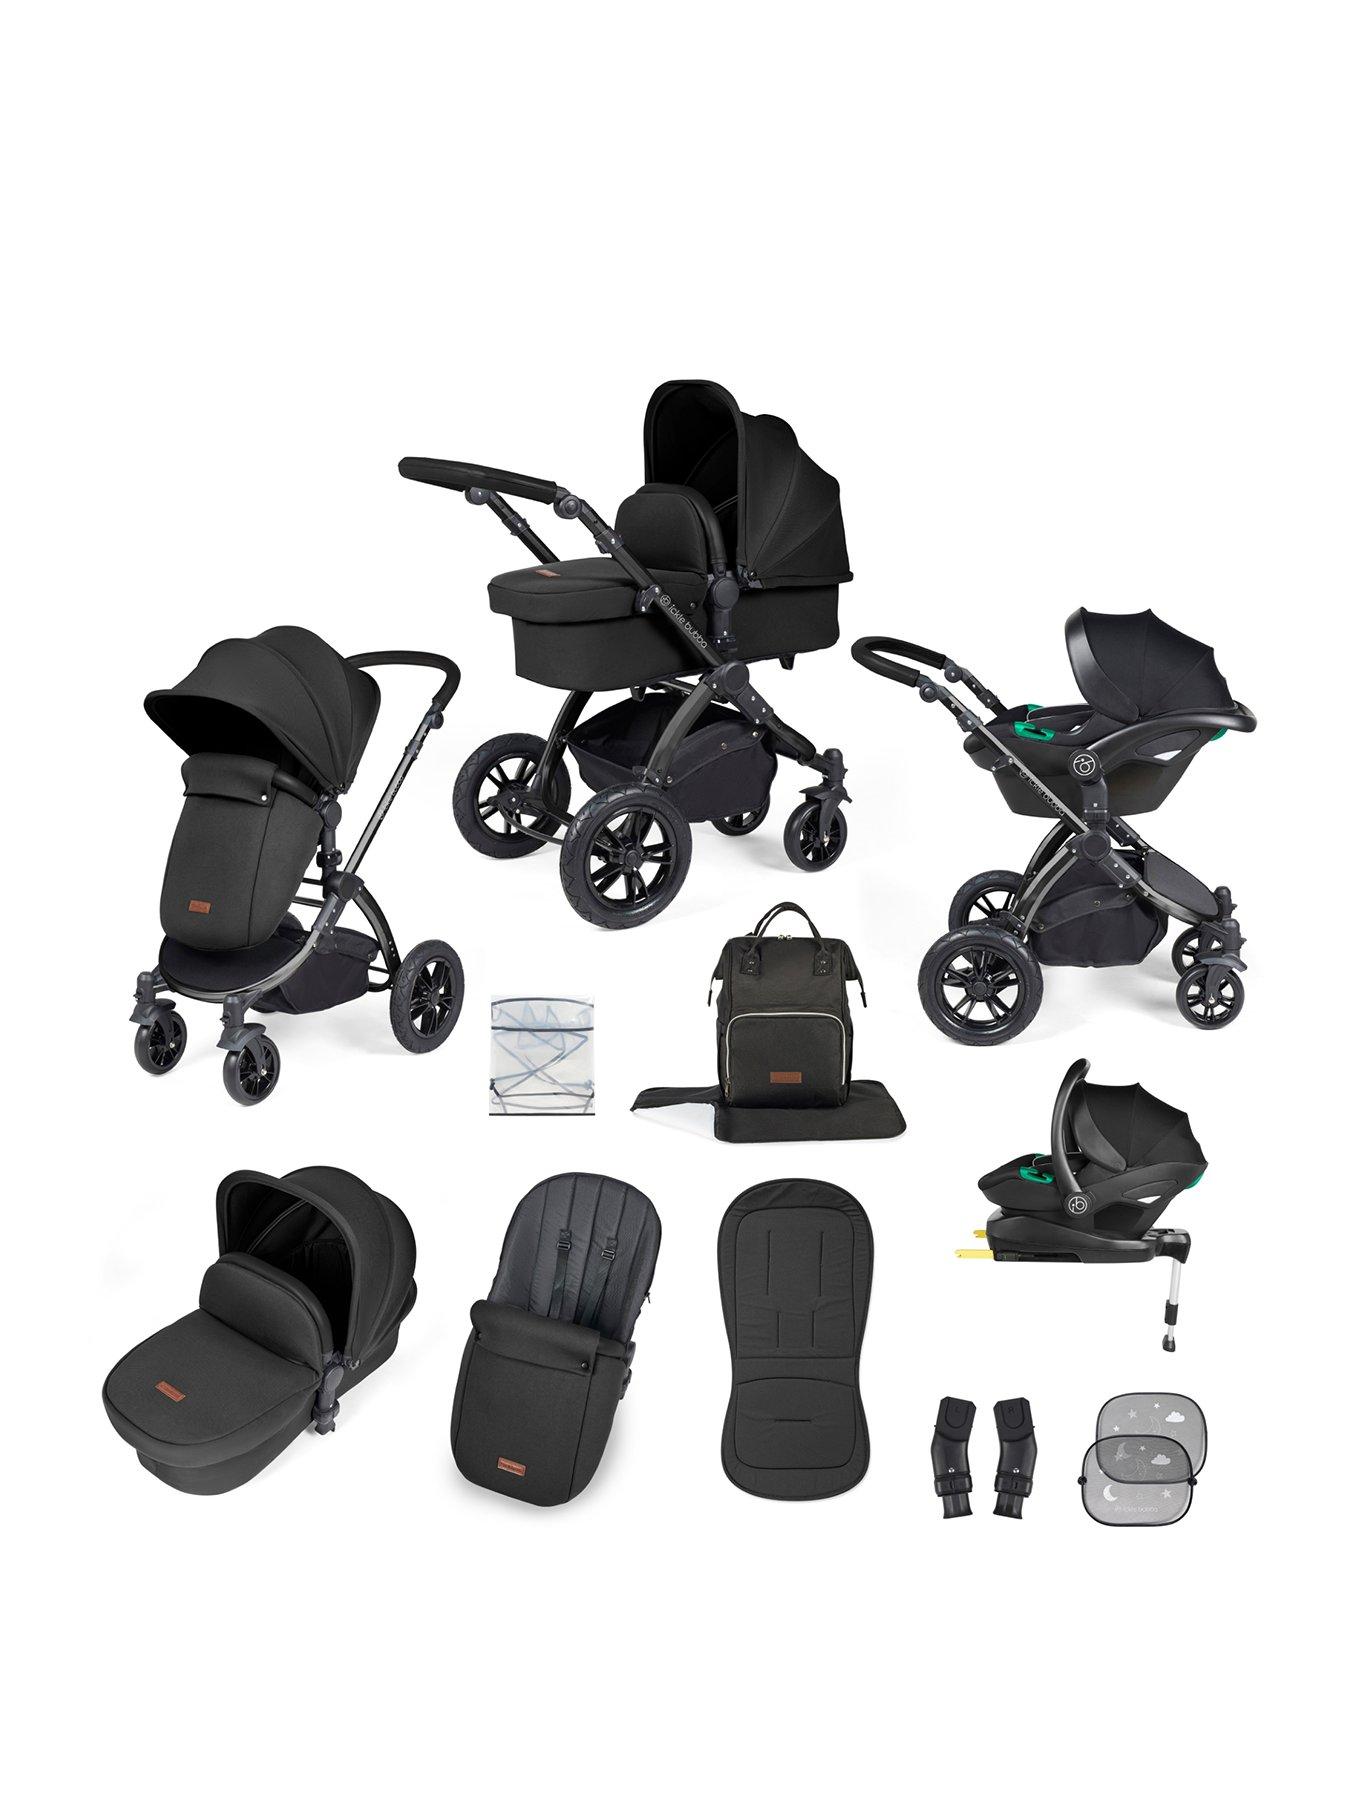 Ickle Bubba Stomp Luxe All-In-One I-Size Travel System With Isofix Base (Stratus) - Black / Midnight / Black